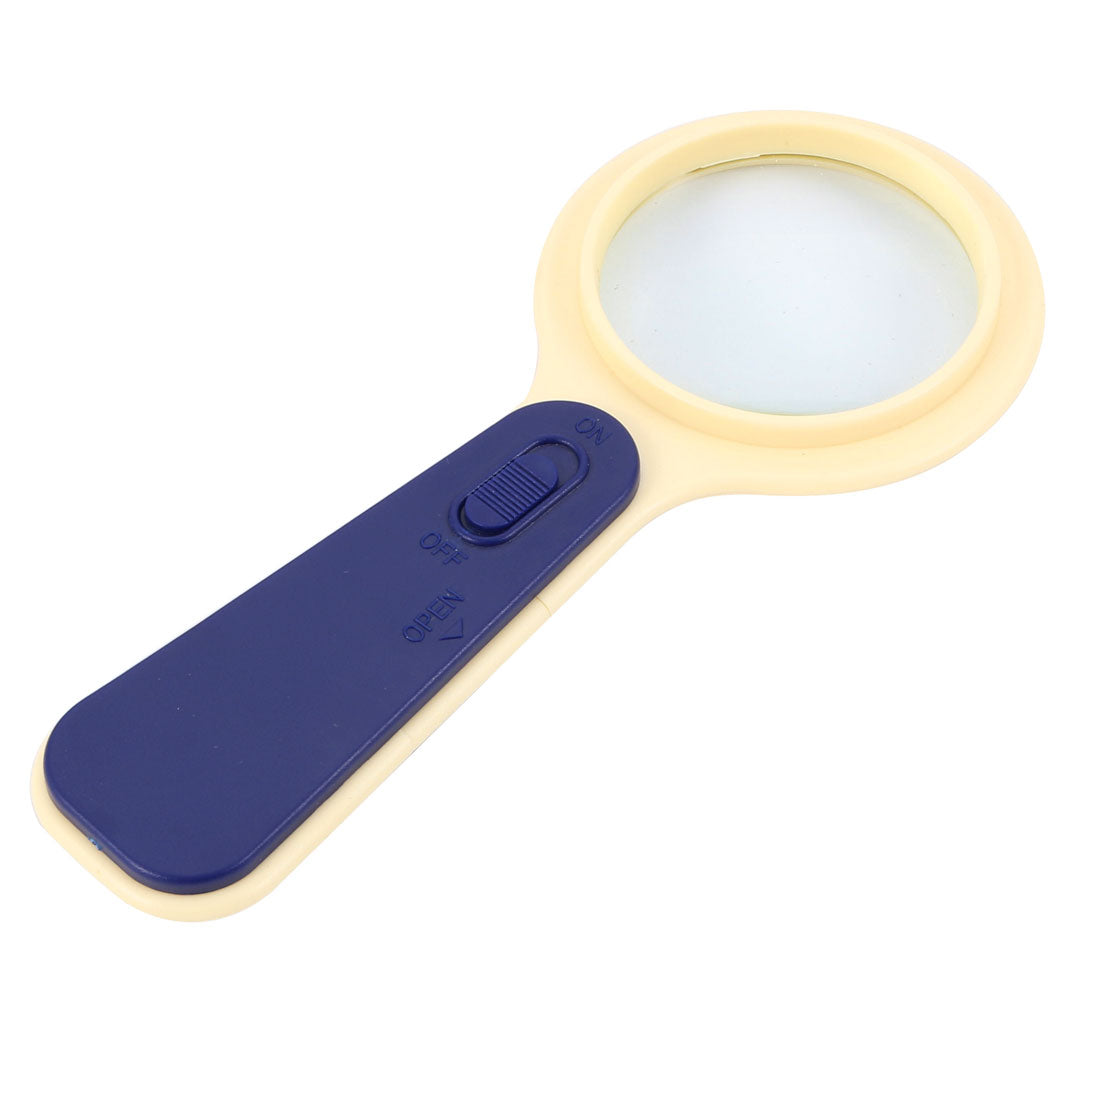 uxcell Uxcell Magnifier 10X Illuminated Magnifier Handheld Magnifying Glass w LED Light